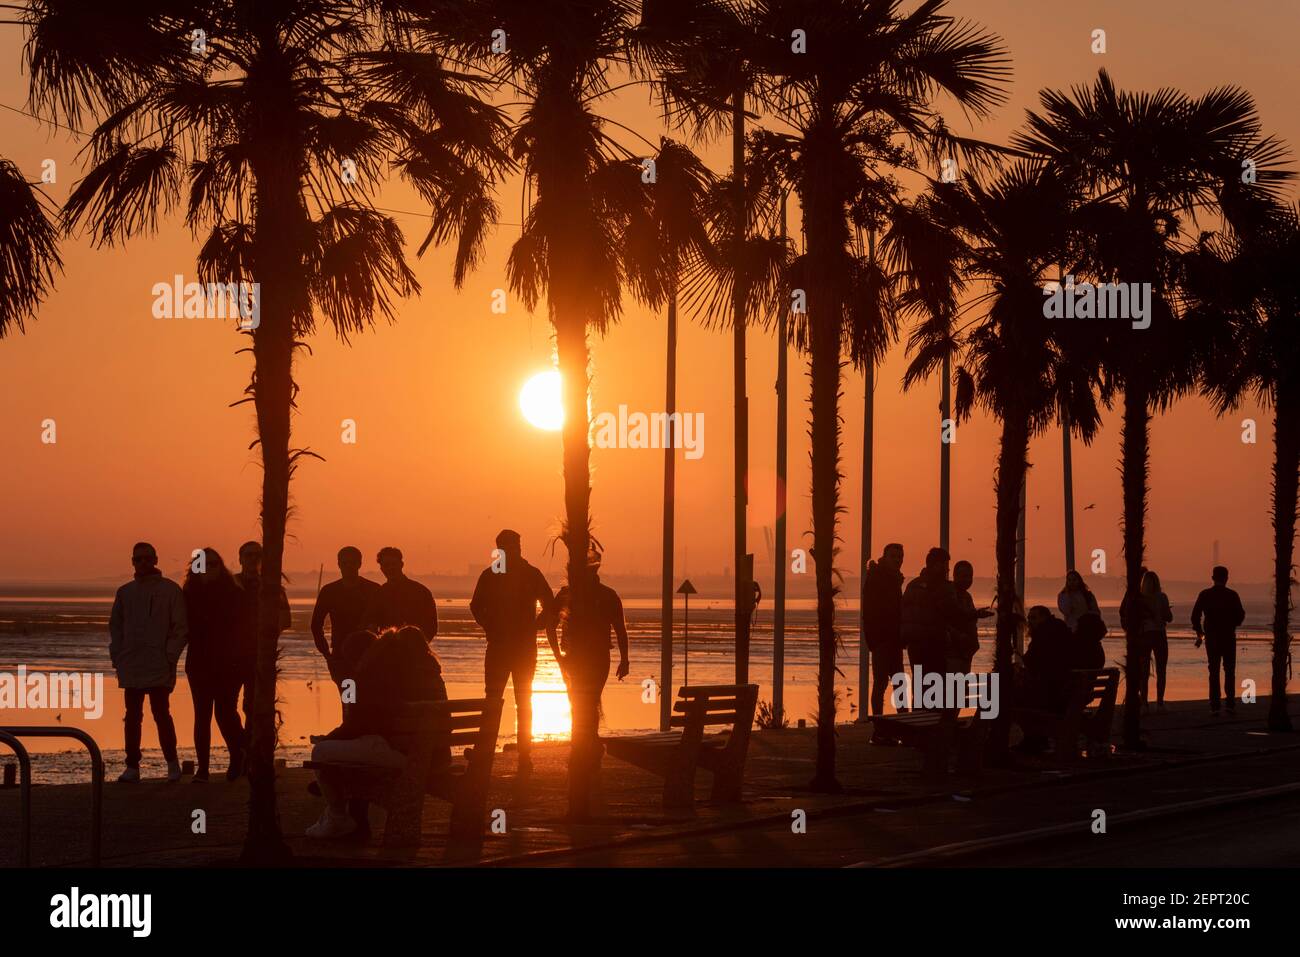 People out walking at sunset in Southend on Sea, Essex, UK, during COVID 19 lockdown. Groups of friends sitting and exercising. Low sun behind palms Stock Photo